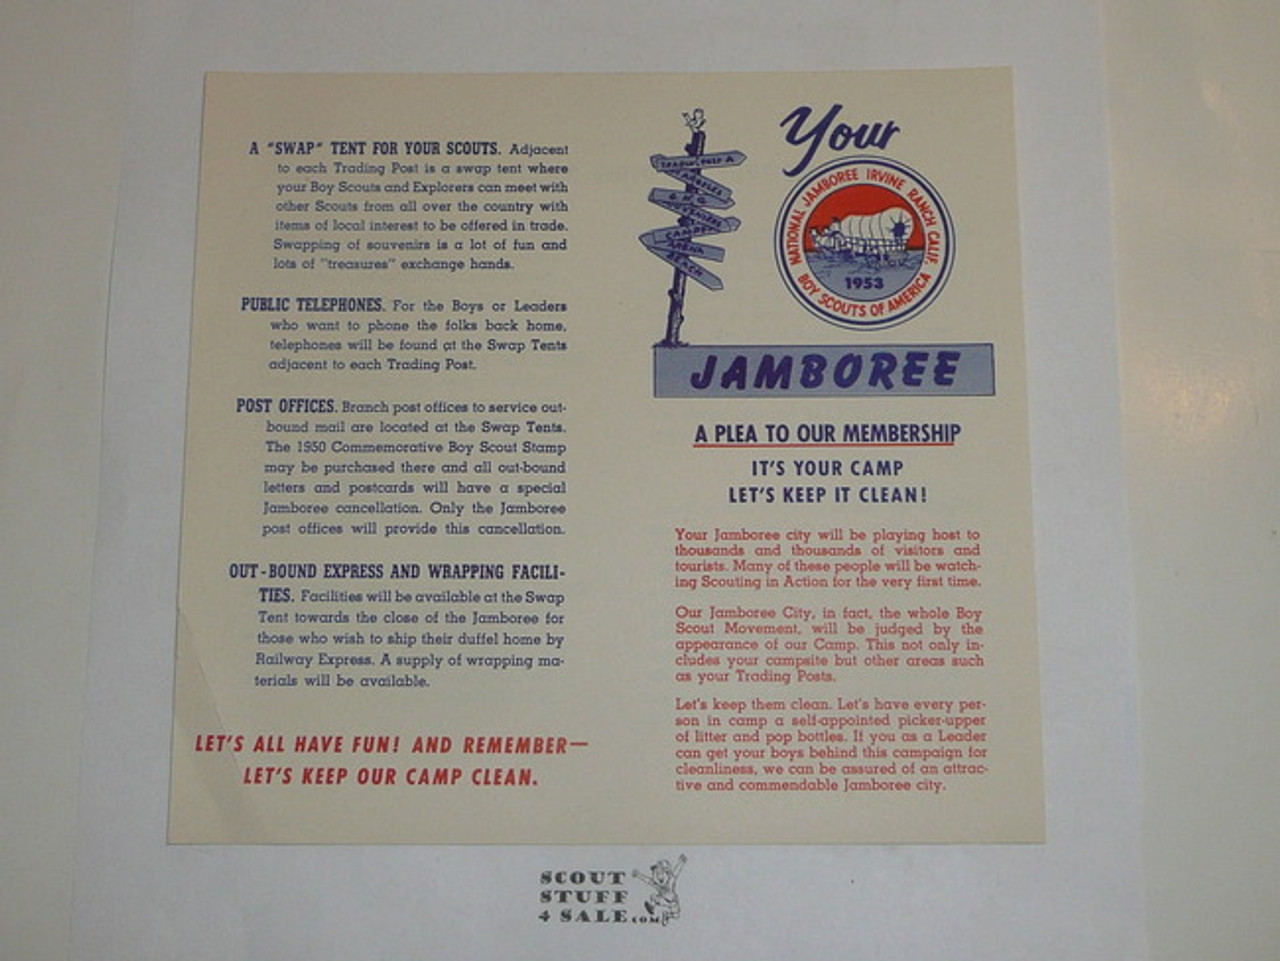 1953 National Jamboree A Plea to Our Membership Flier